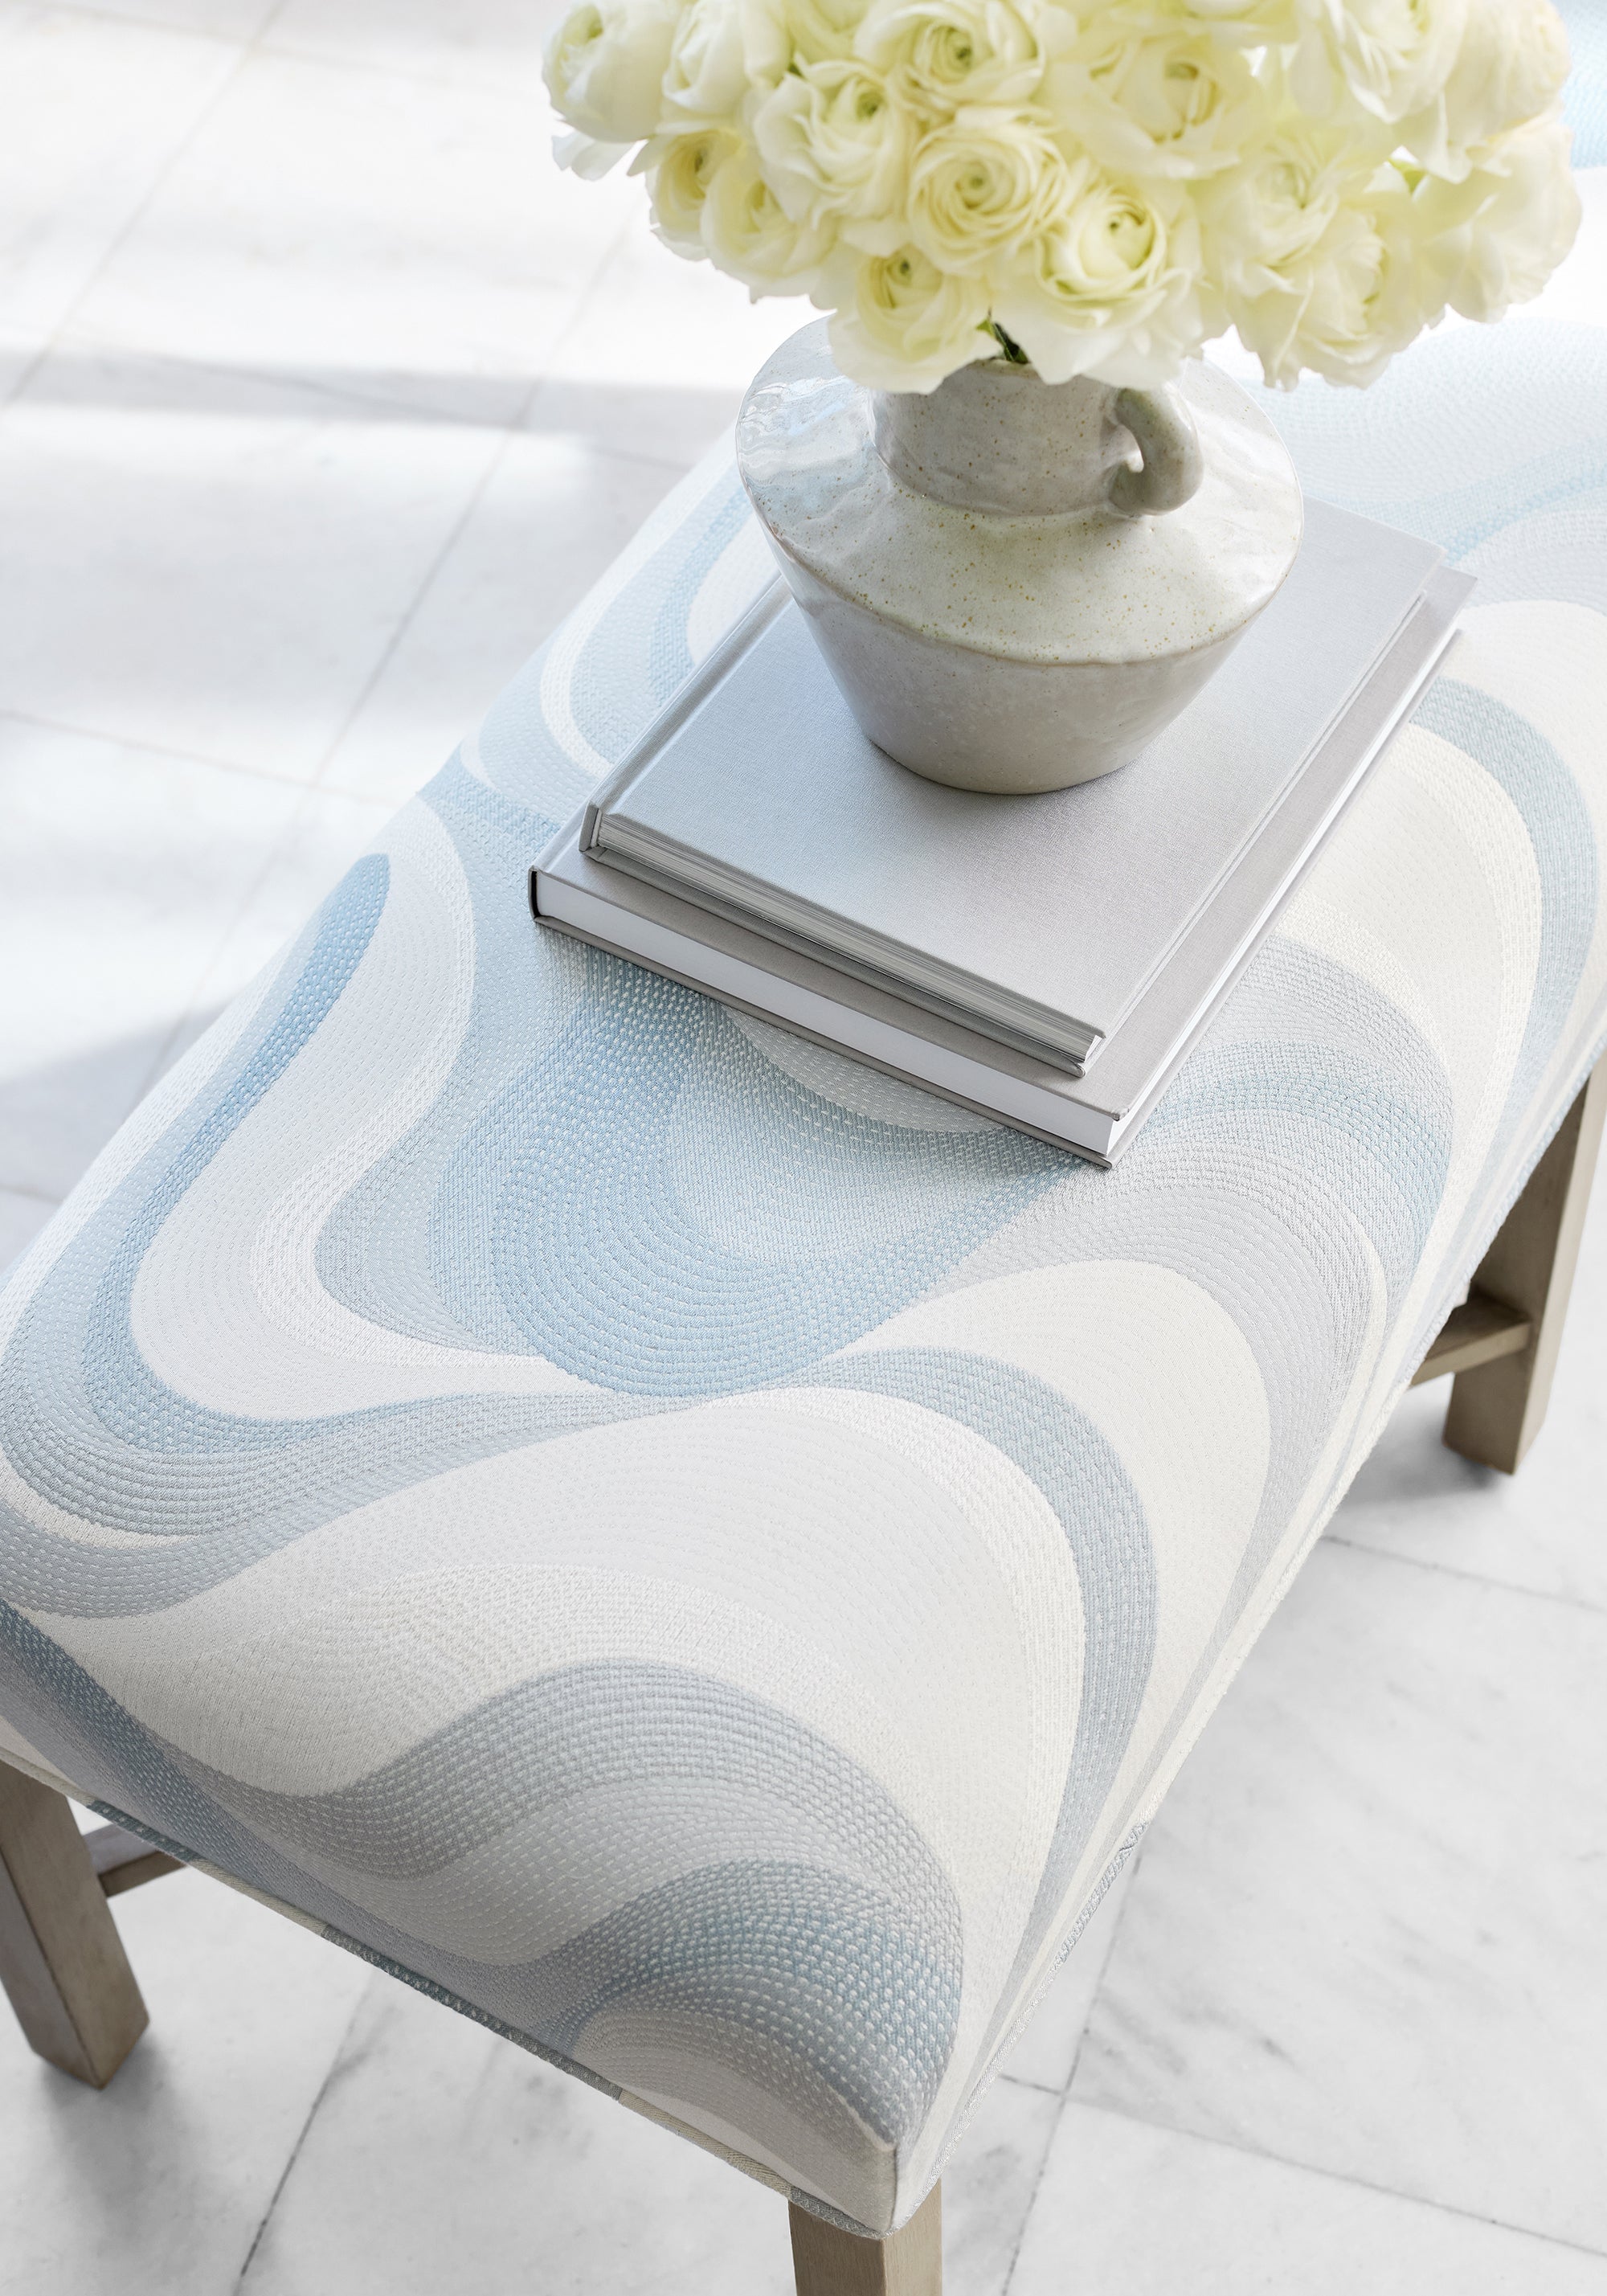 Bellwood Bench in Passage woven fabric in Glacier color - pattern number W74202 - by Thibaut in the Passage collection